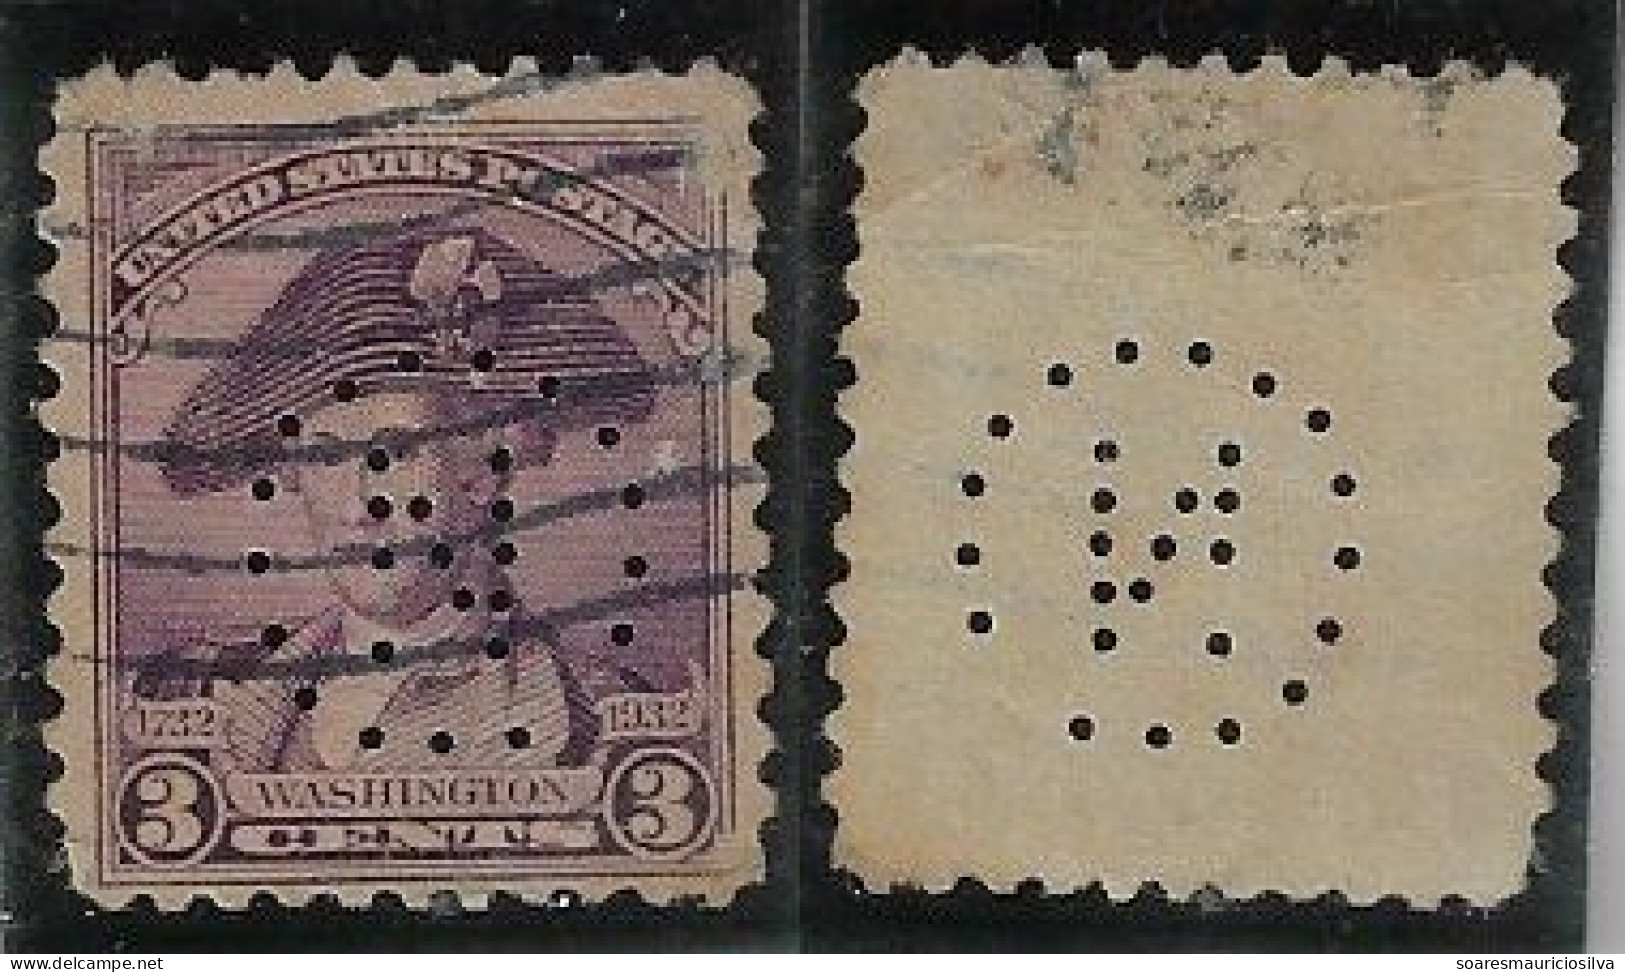 USA United States 1926/1965 Stamp With Perfin N (Circle) By Norton Company From Worcester Lochung Perfore - Perfin